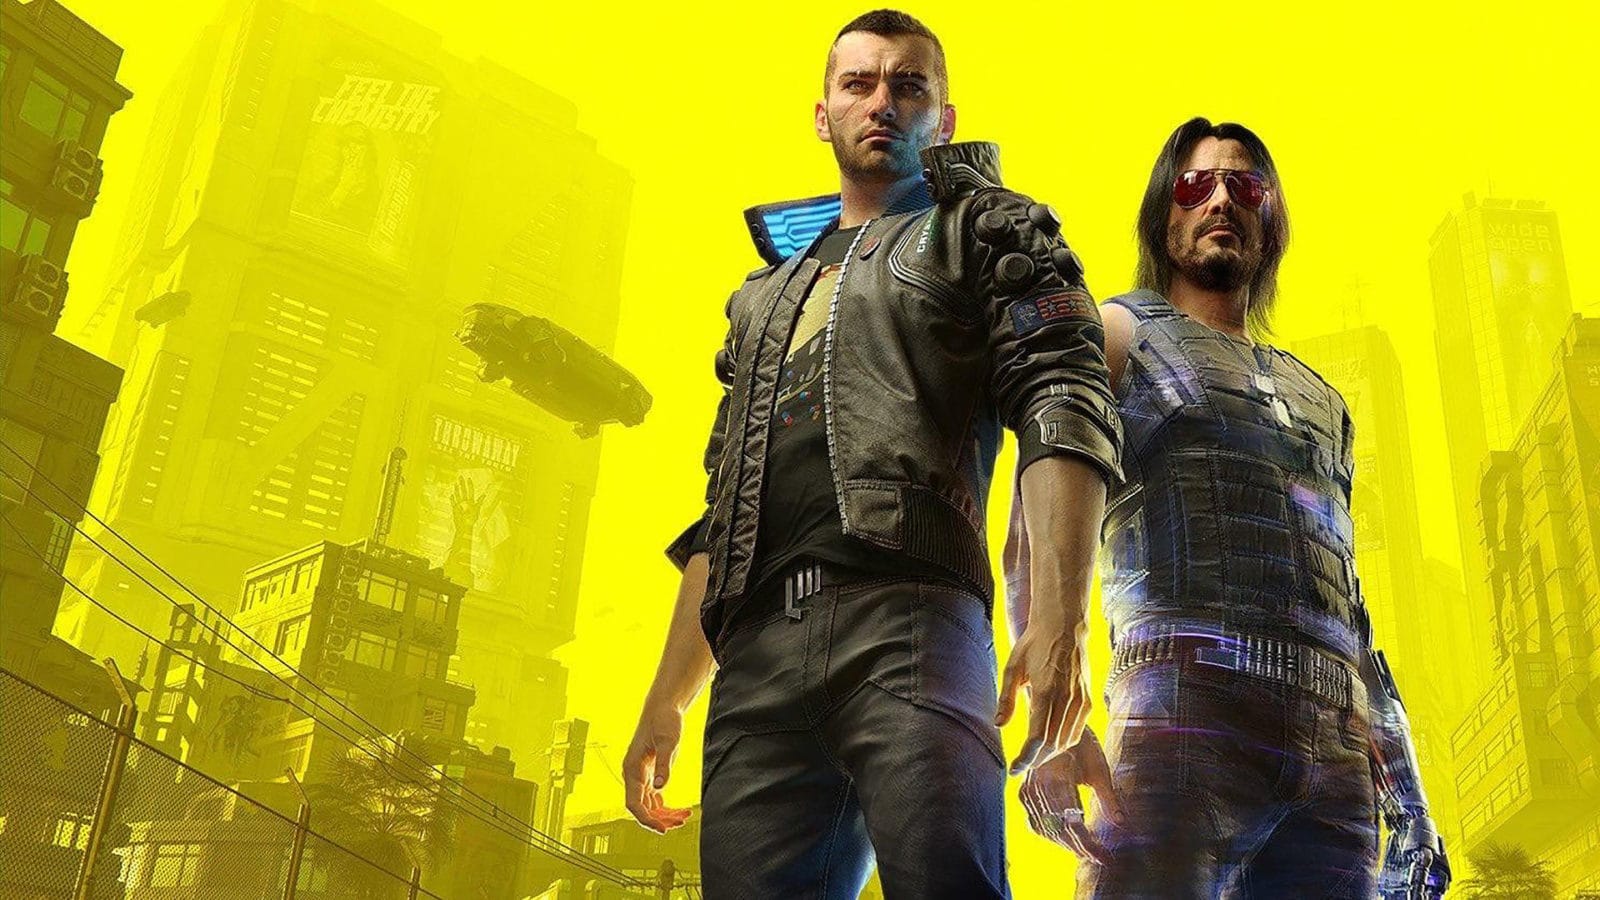 Cyberpunk 2077: What is it about?